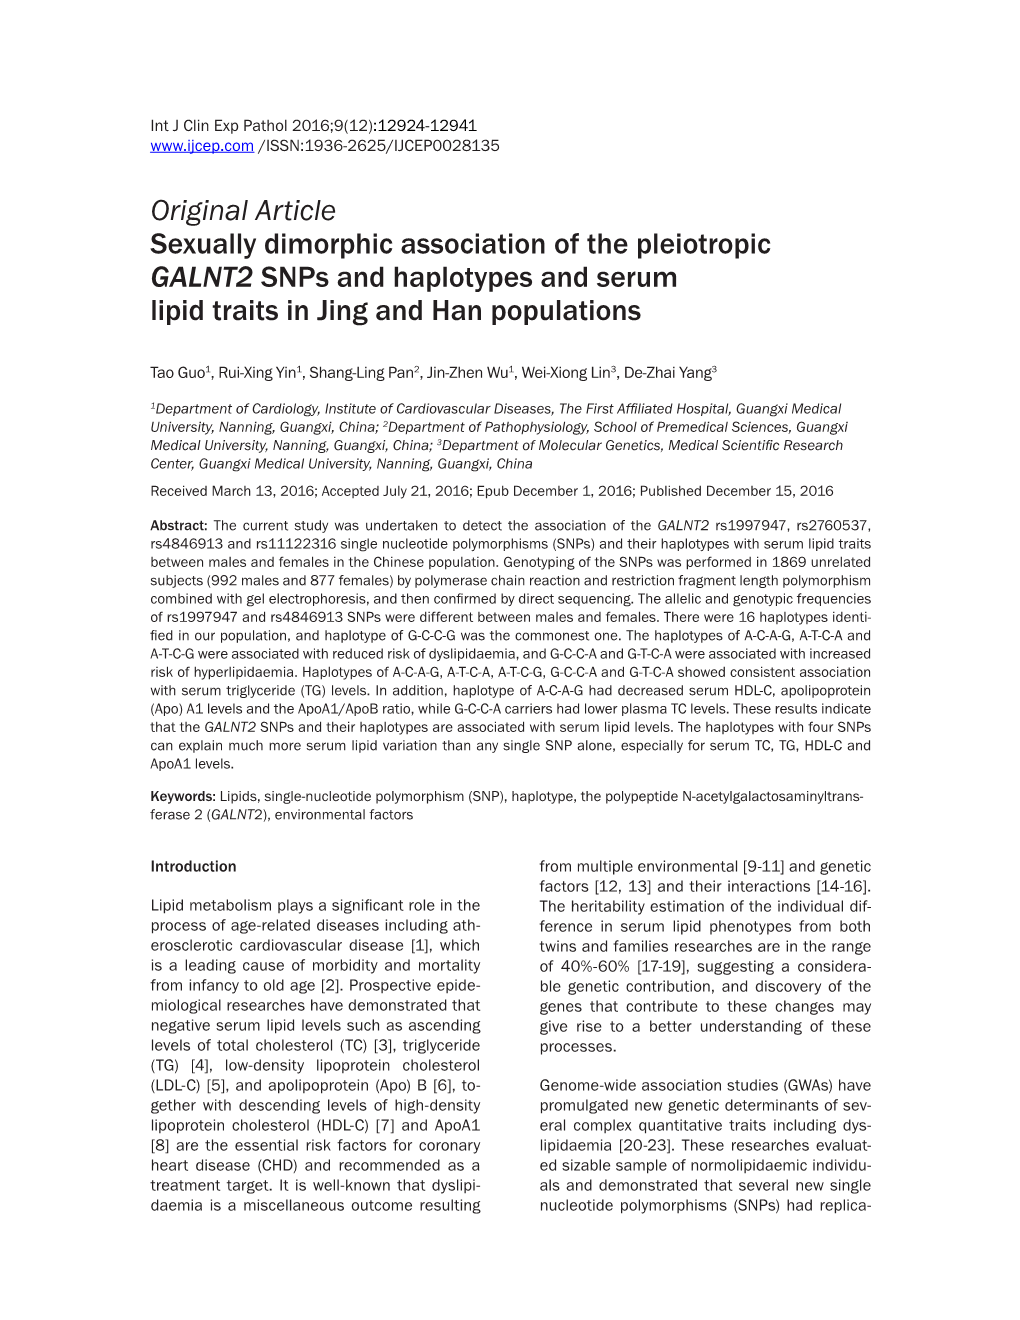 Original Article Sexually Dimorphic Association of the Pleiotropic GALNT2 Snps and Haplotypes and Serum Lipid Traits in Jing and Han Populations